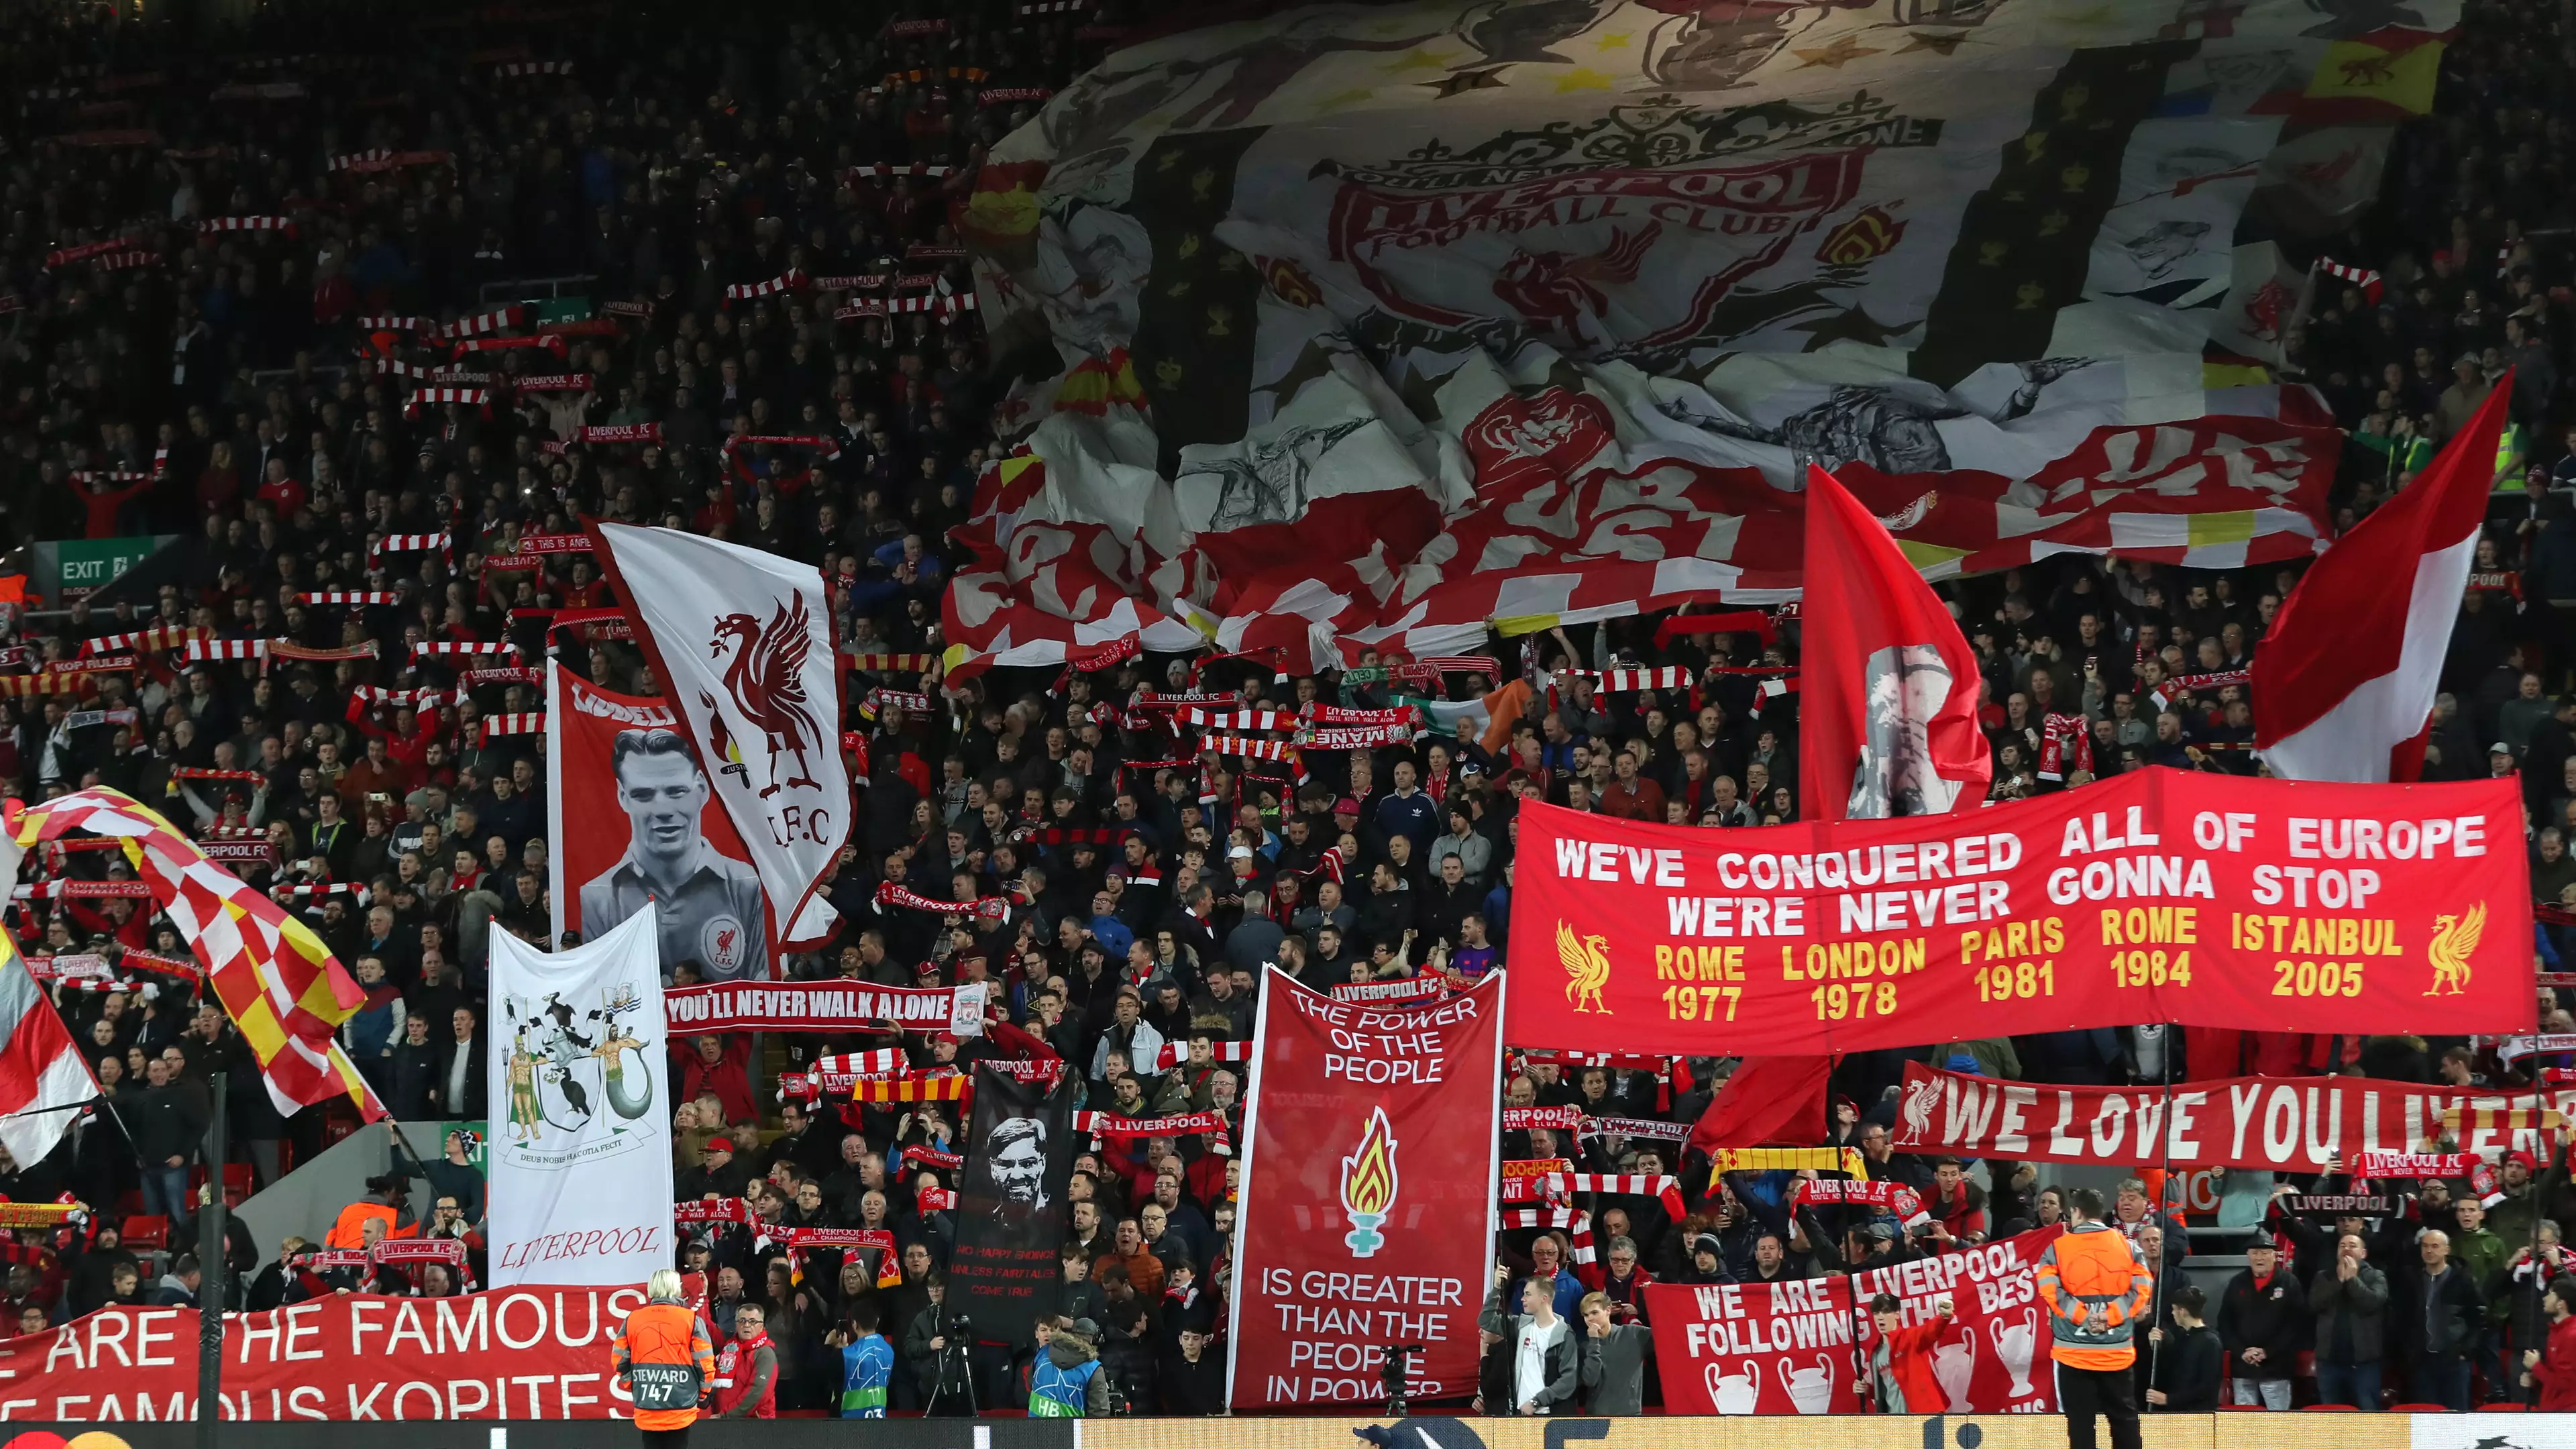 Tickets For Liverpool's Final Day Clash With Wolves On Sale For Ridiculous £6,000 On Resale Website